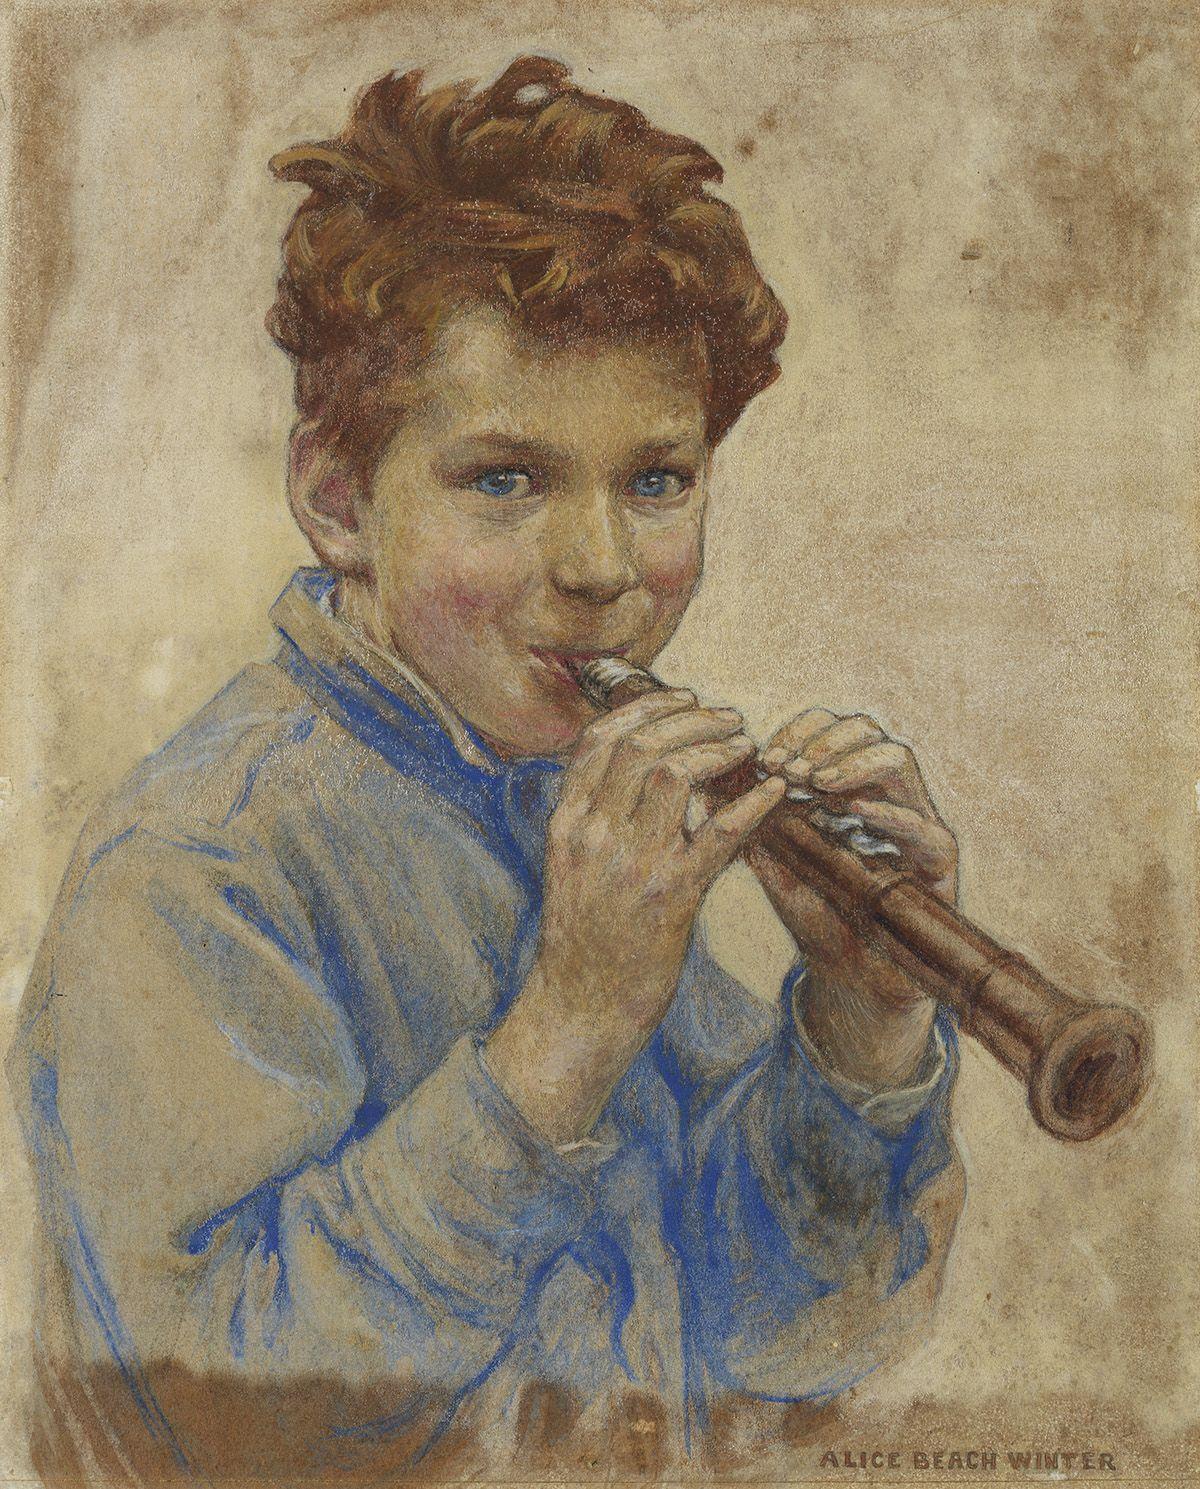 Boy with Clarinet, Cover for Children Magazine, 1927